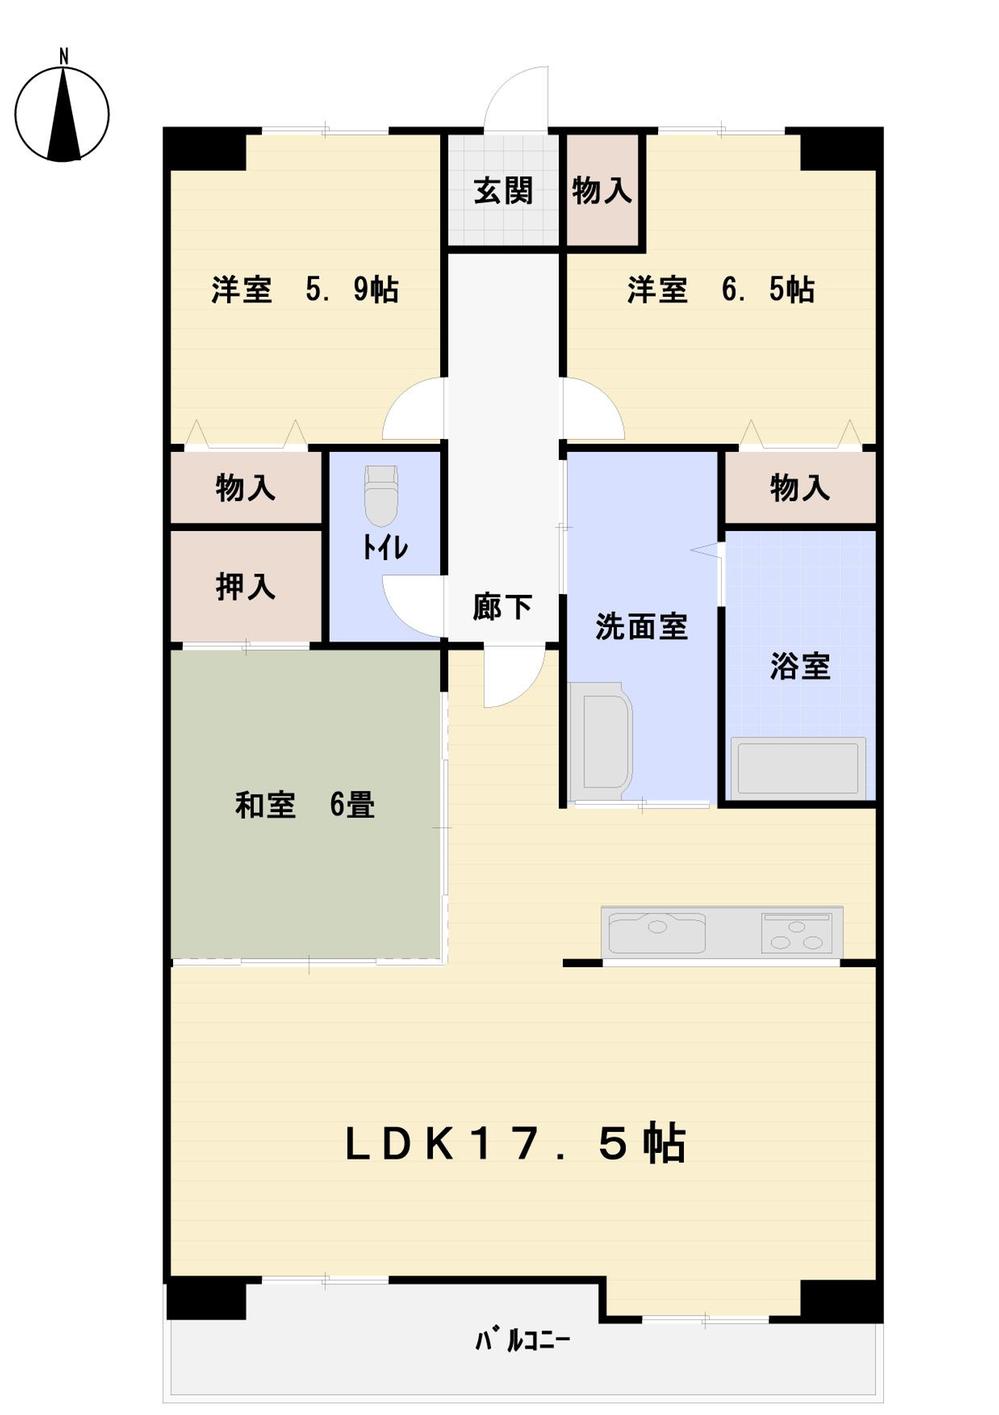 Floor plan. 3LDK, Price 13.8 million yen, Occupied area 84.67 sq m , Balcony area is 9.5 sq m easy-to-use 3LDK. This renovated property.